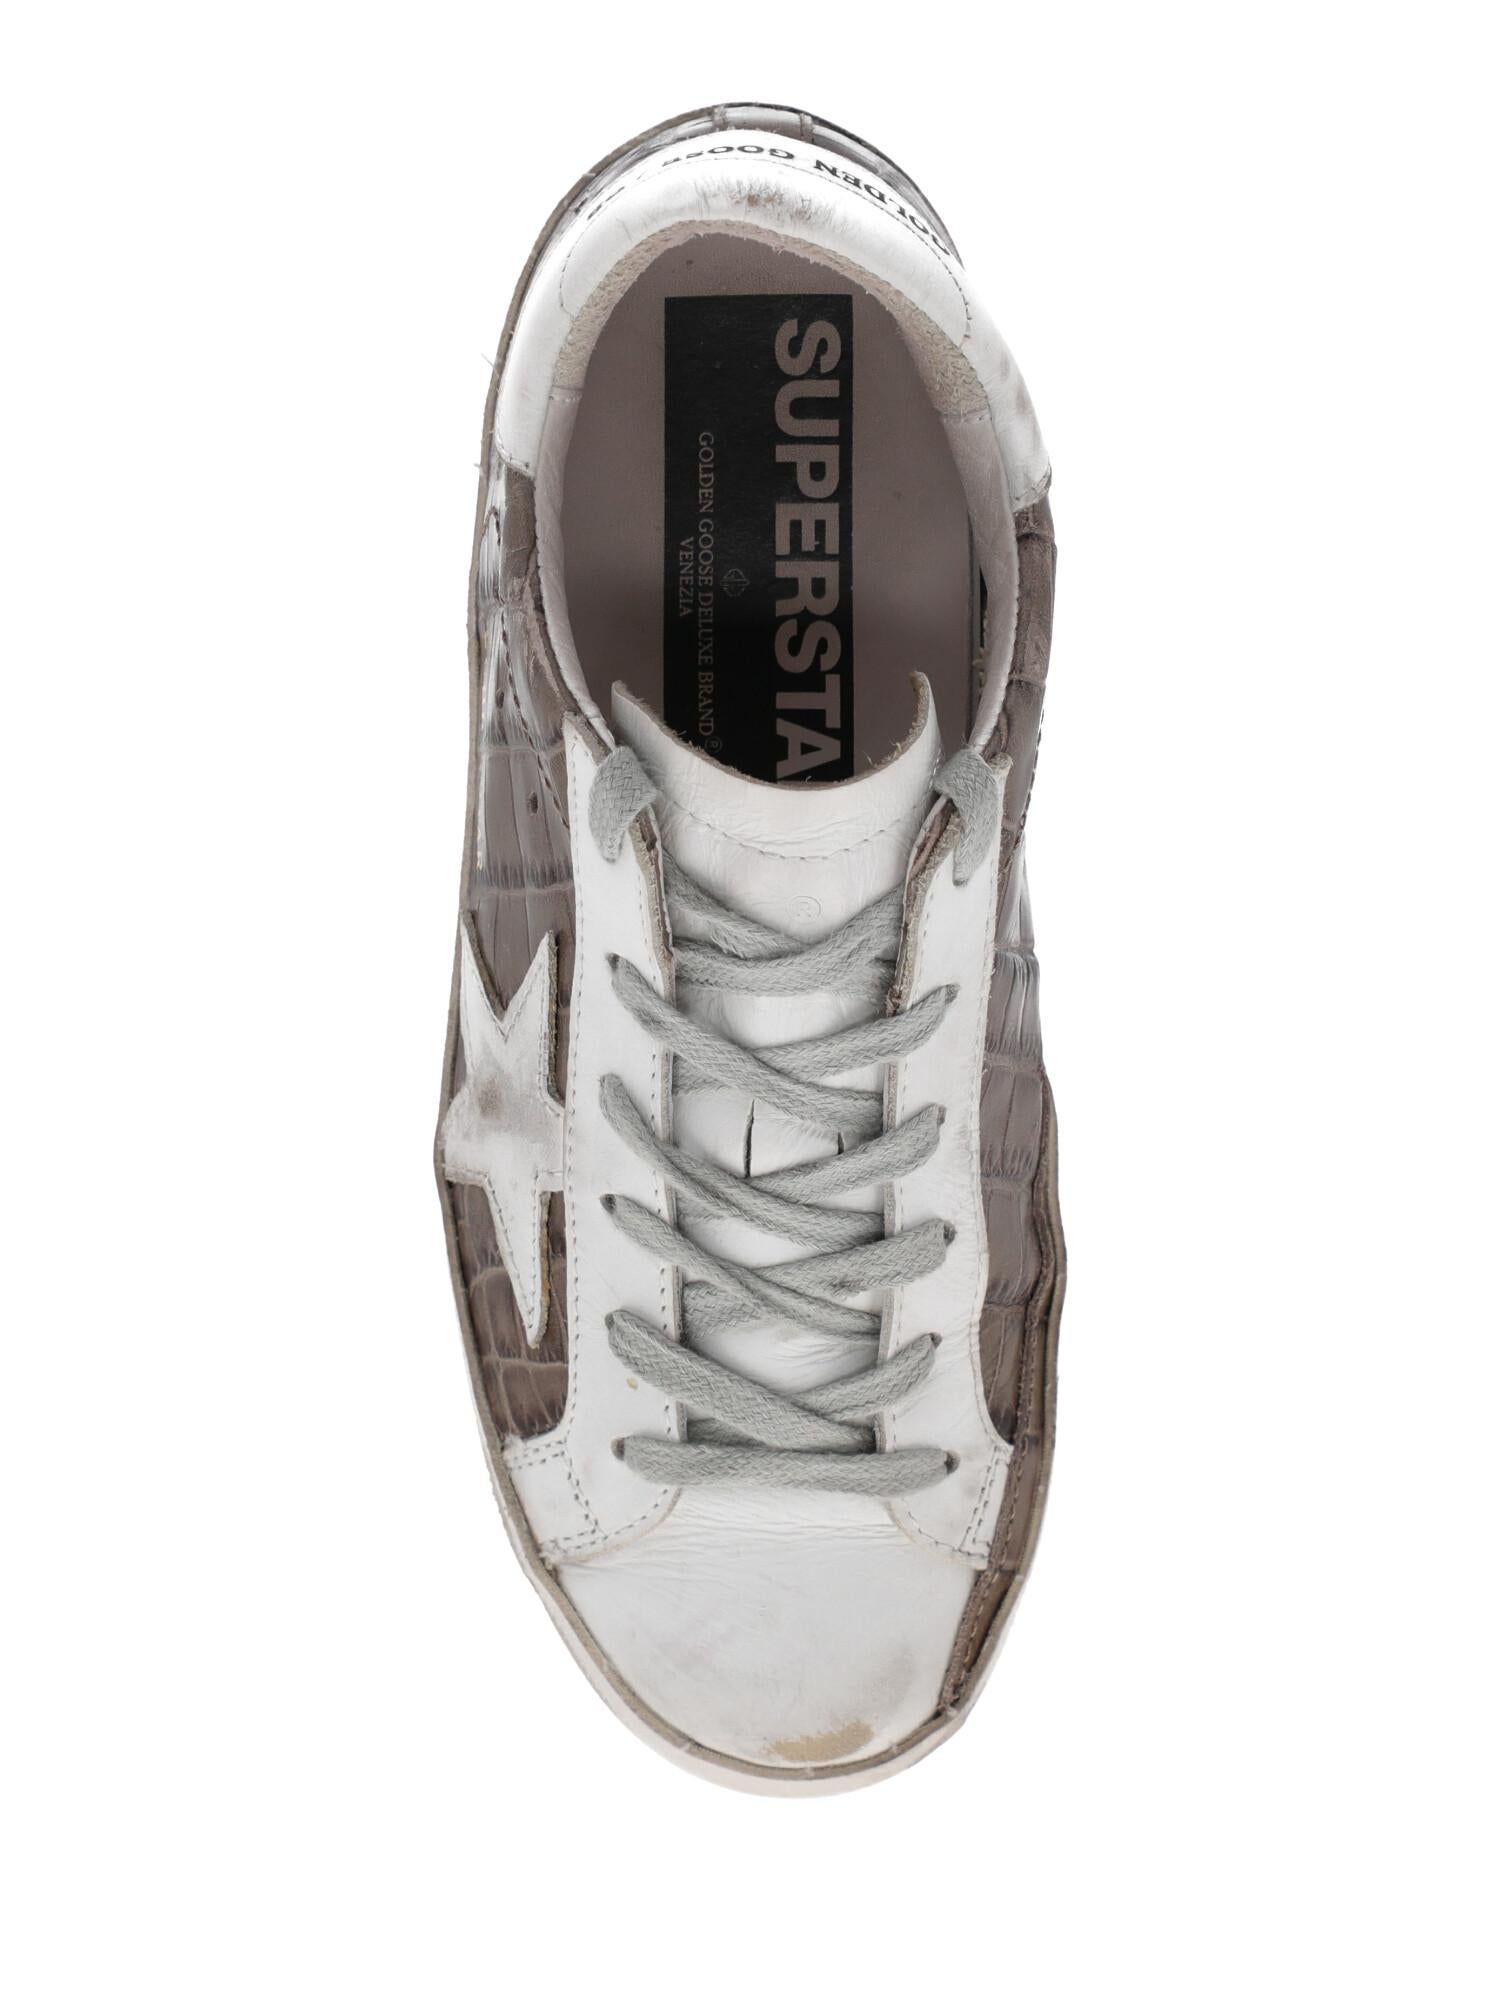 Golden Goose Deluxe Brand Women Sneakers Brown, White Leather EU 35 In Fair Condition For Sale In Milan, IT